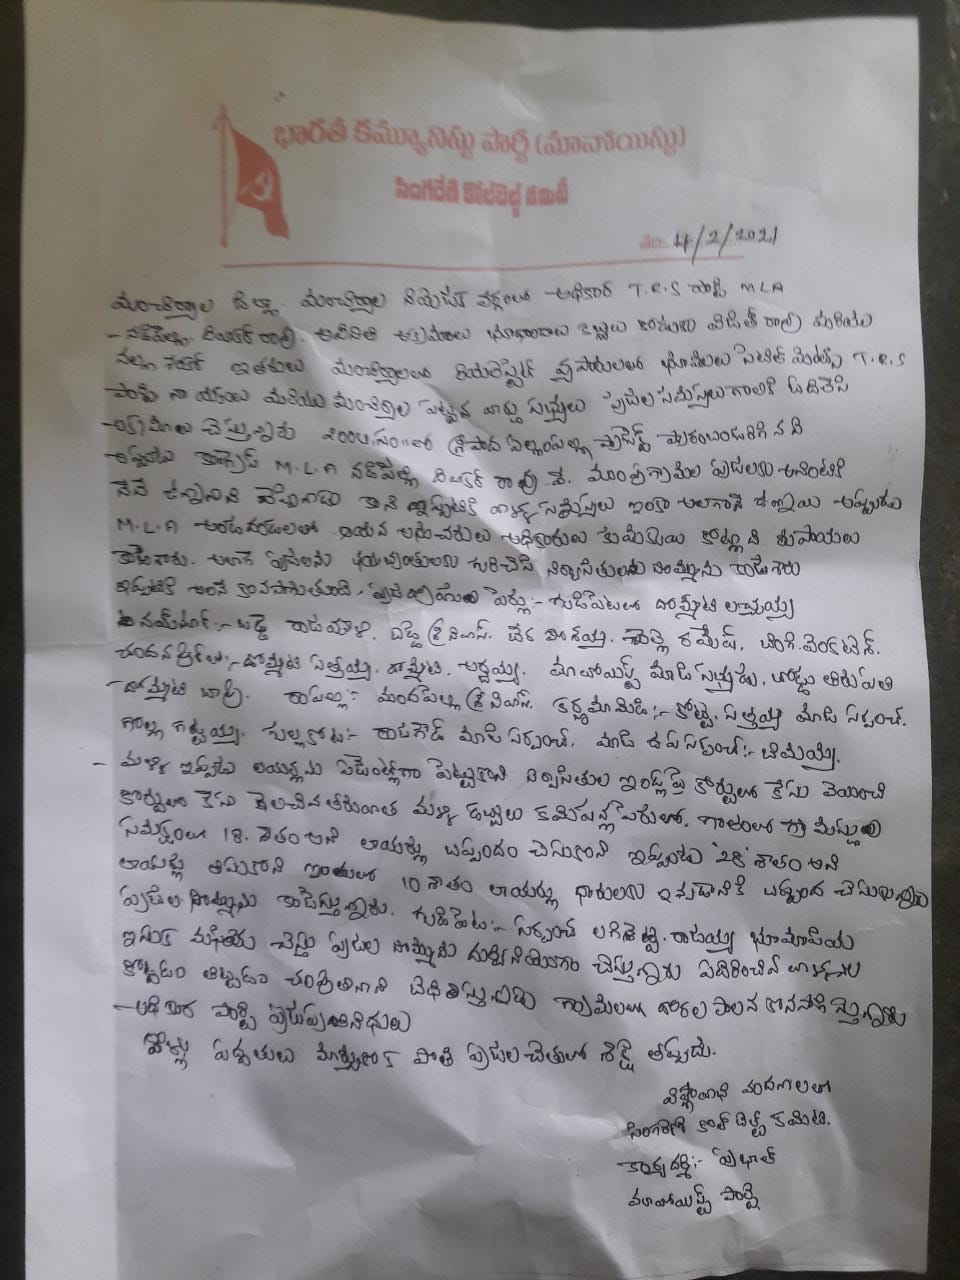 The letter of the Maoists created a stir in the Manchirala constituency